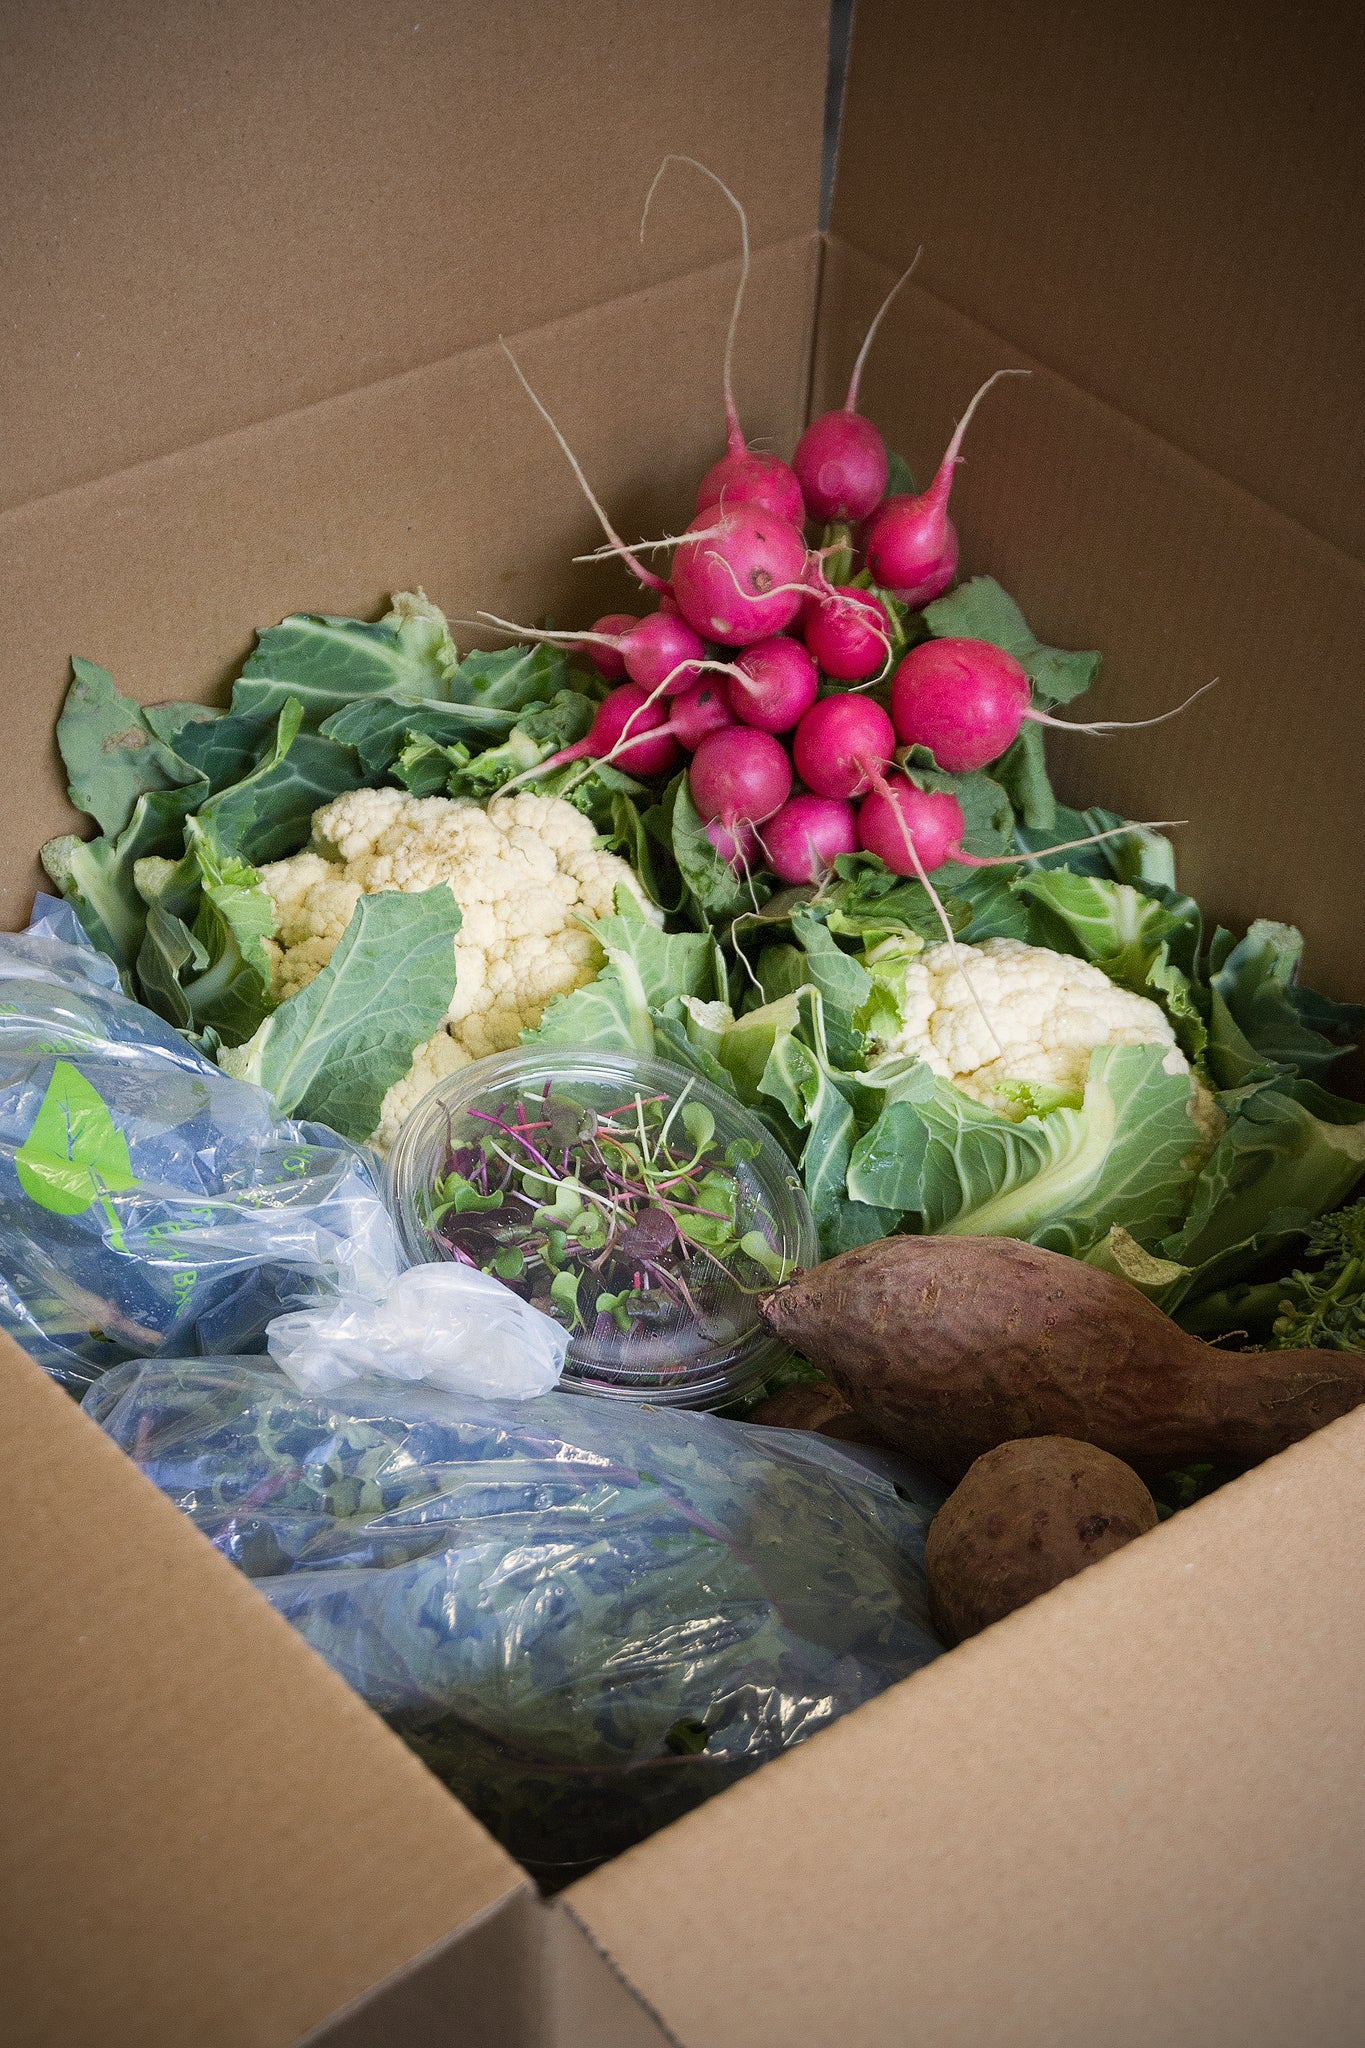 The Classic Fruit and Vege Box, one time or weekly subscription